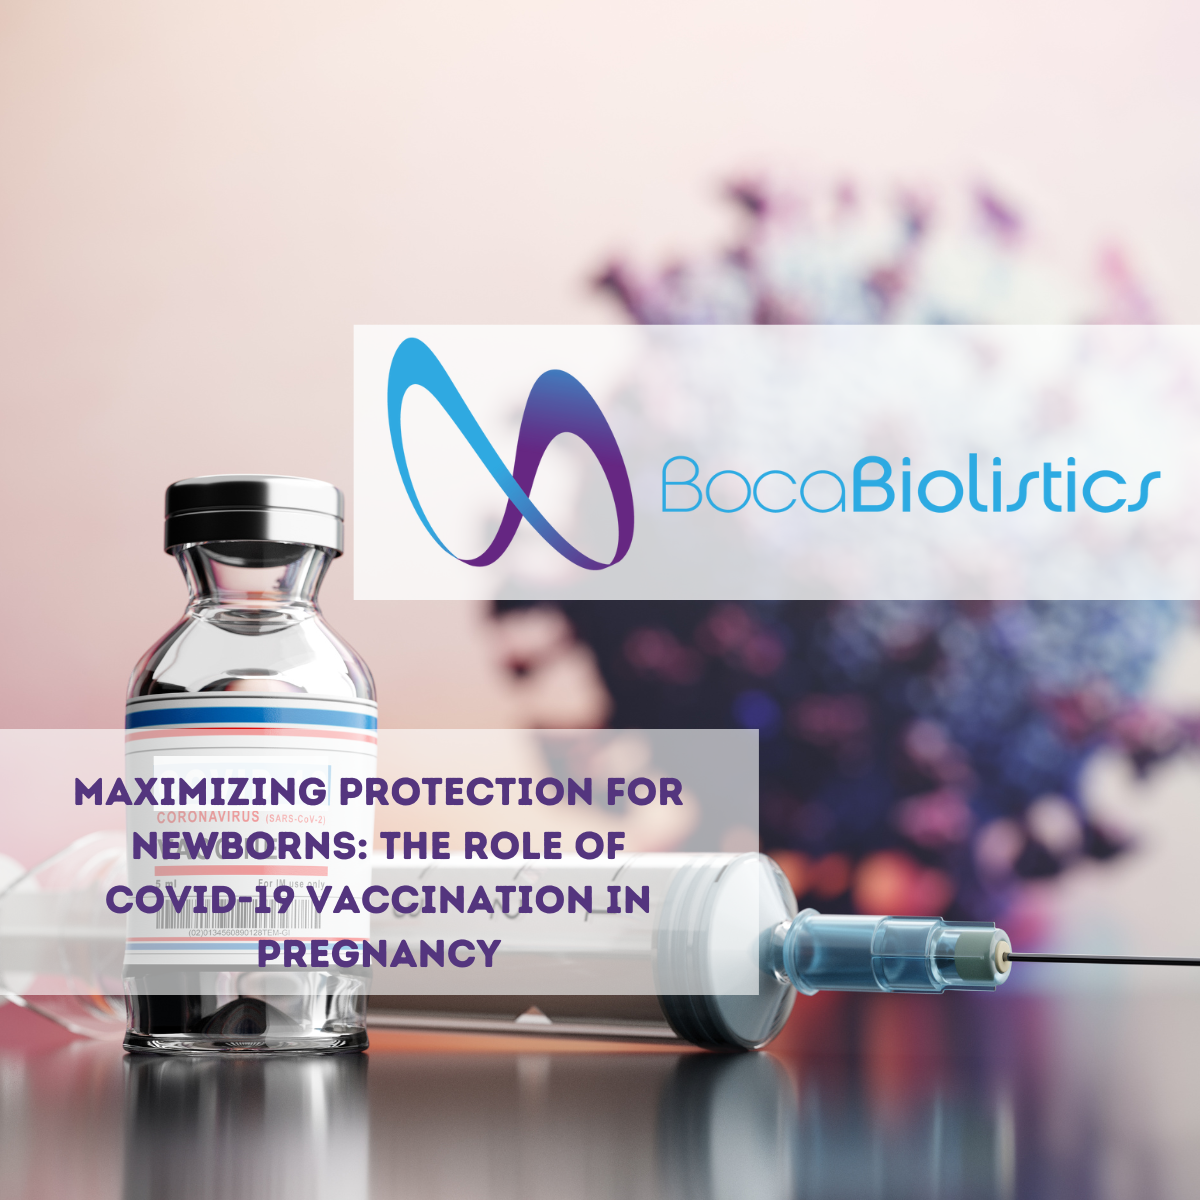 Maximizing Protection for Newborns: The Role of COVID-19 Vaccination in Pregnancy